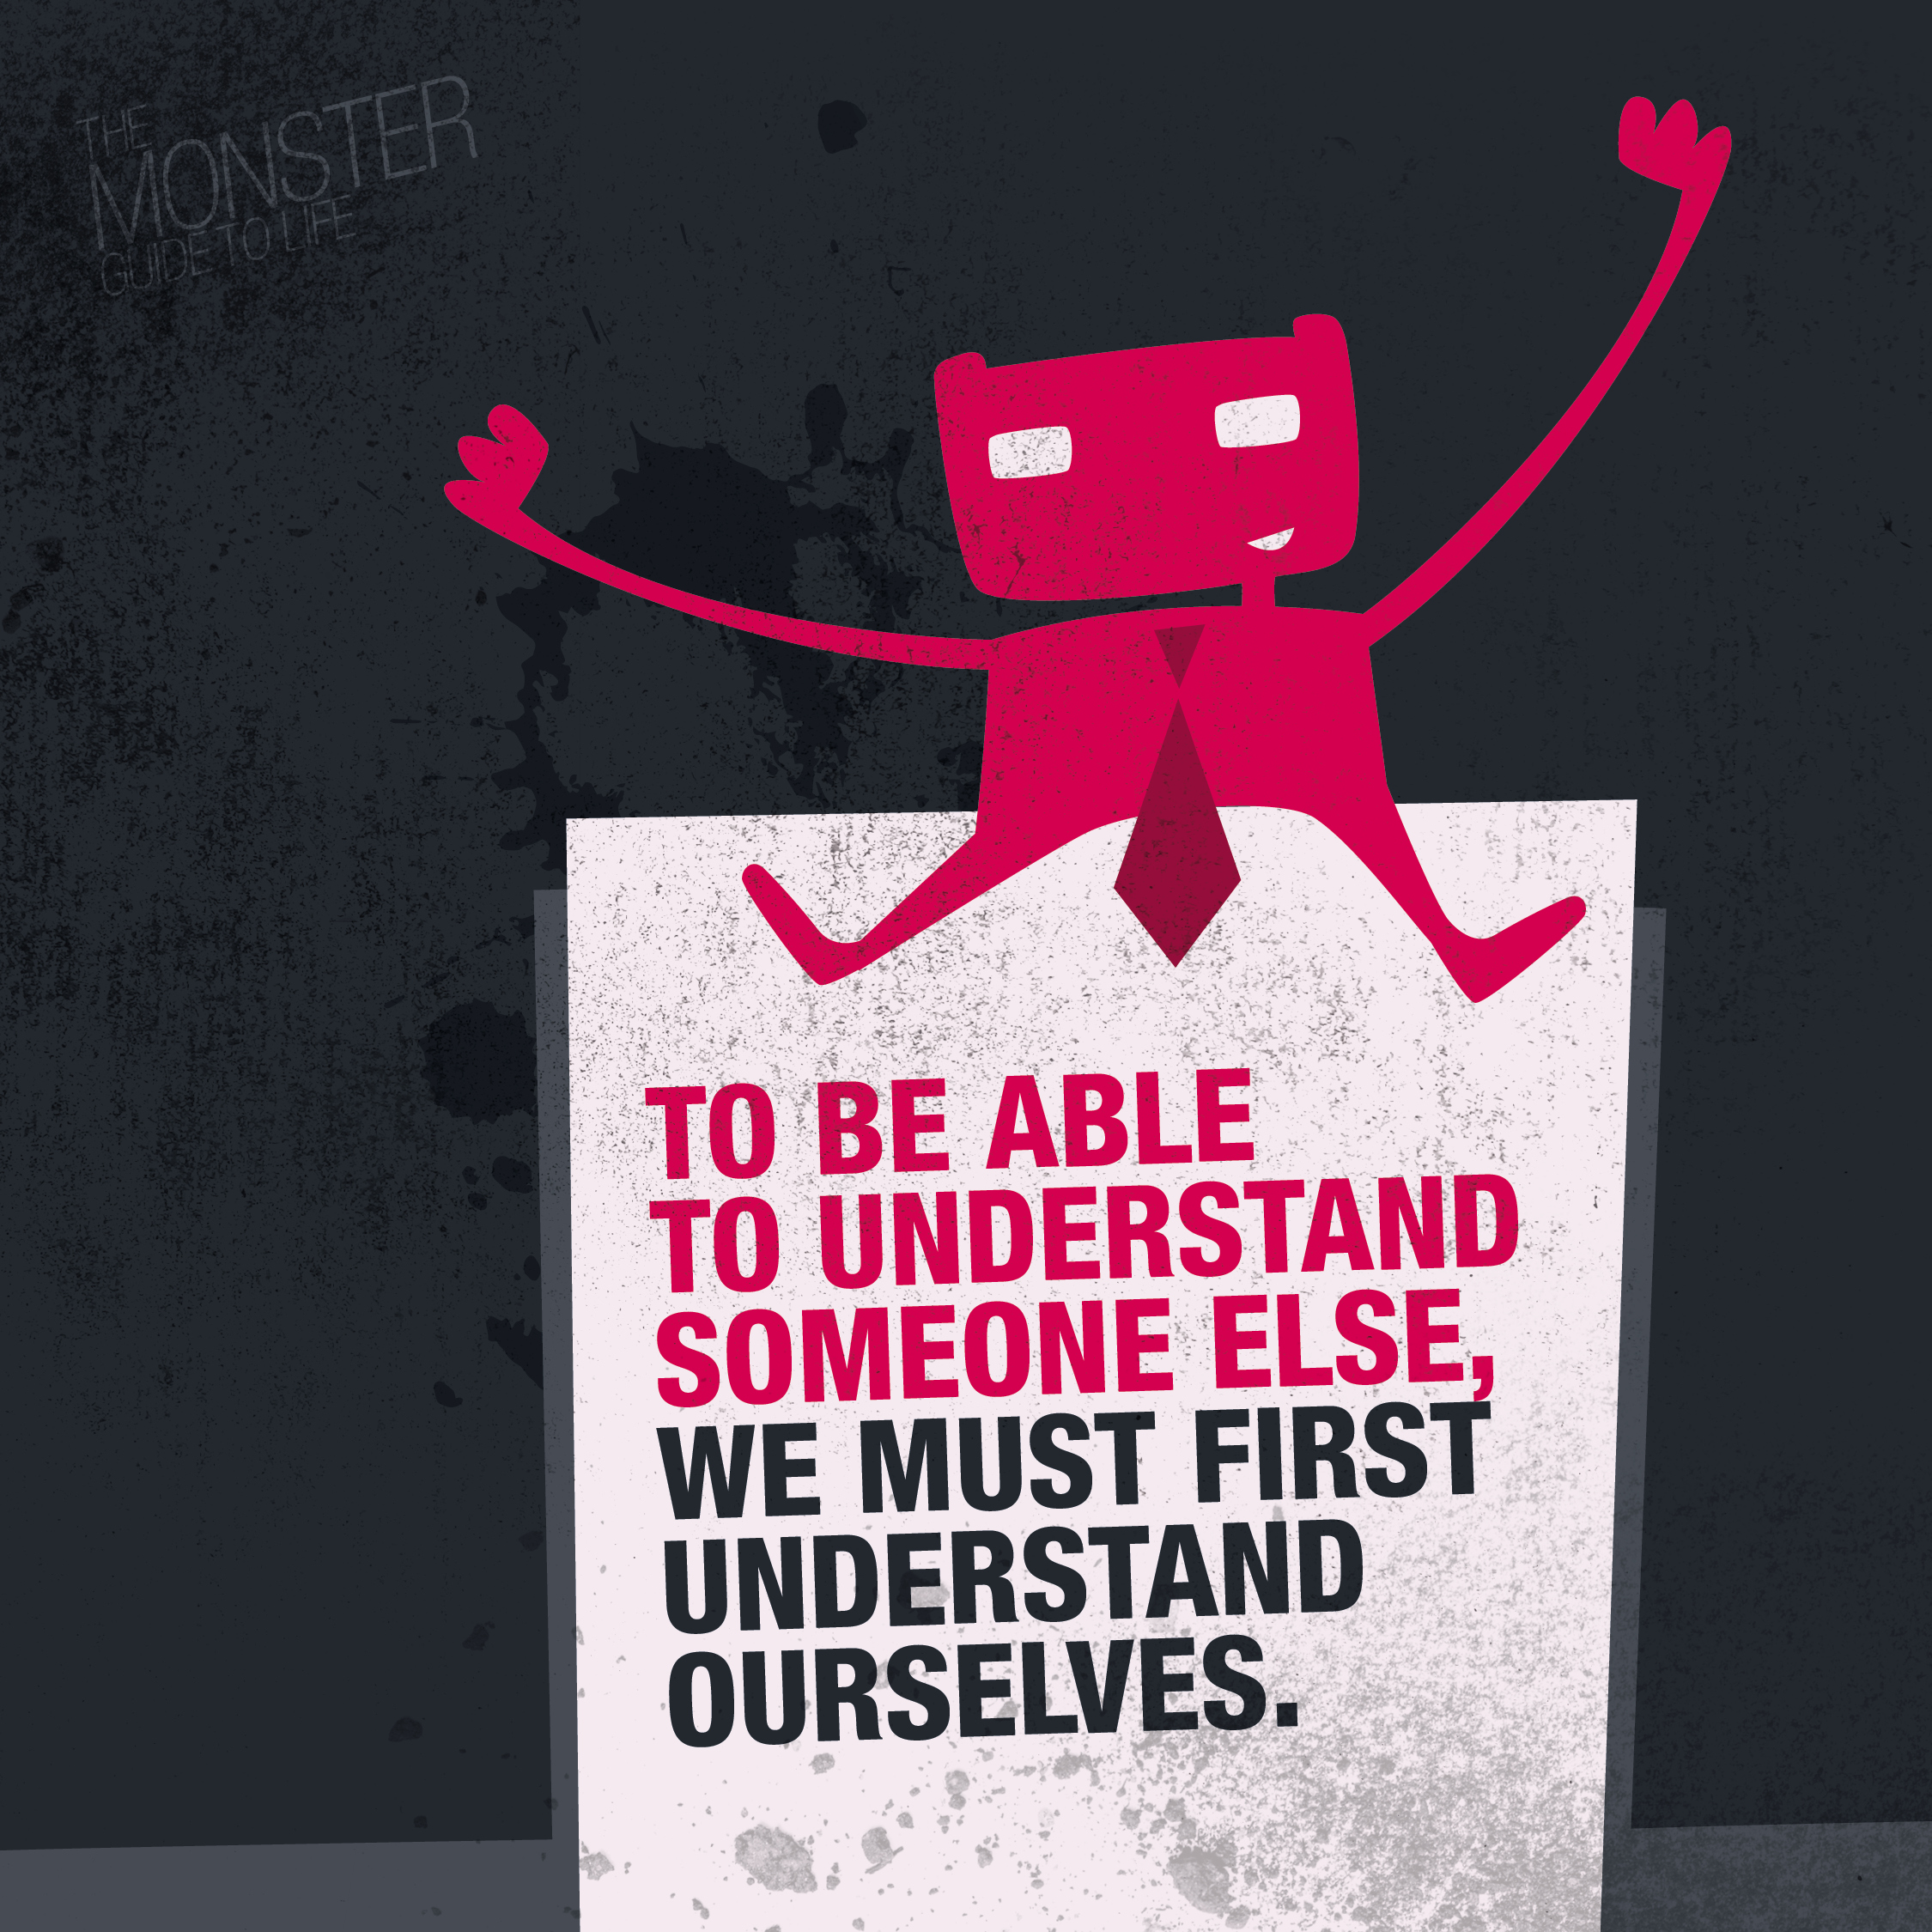 To be able to understand someone else, we must first understand ourselves